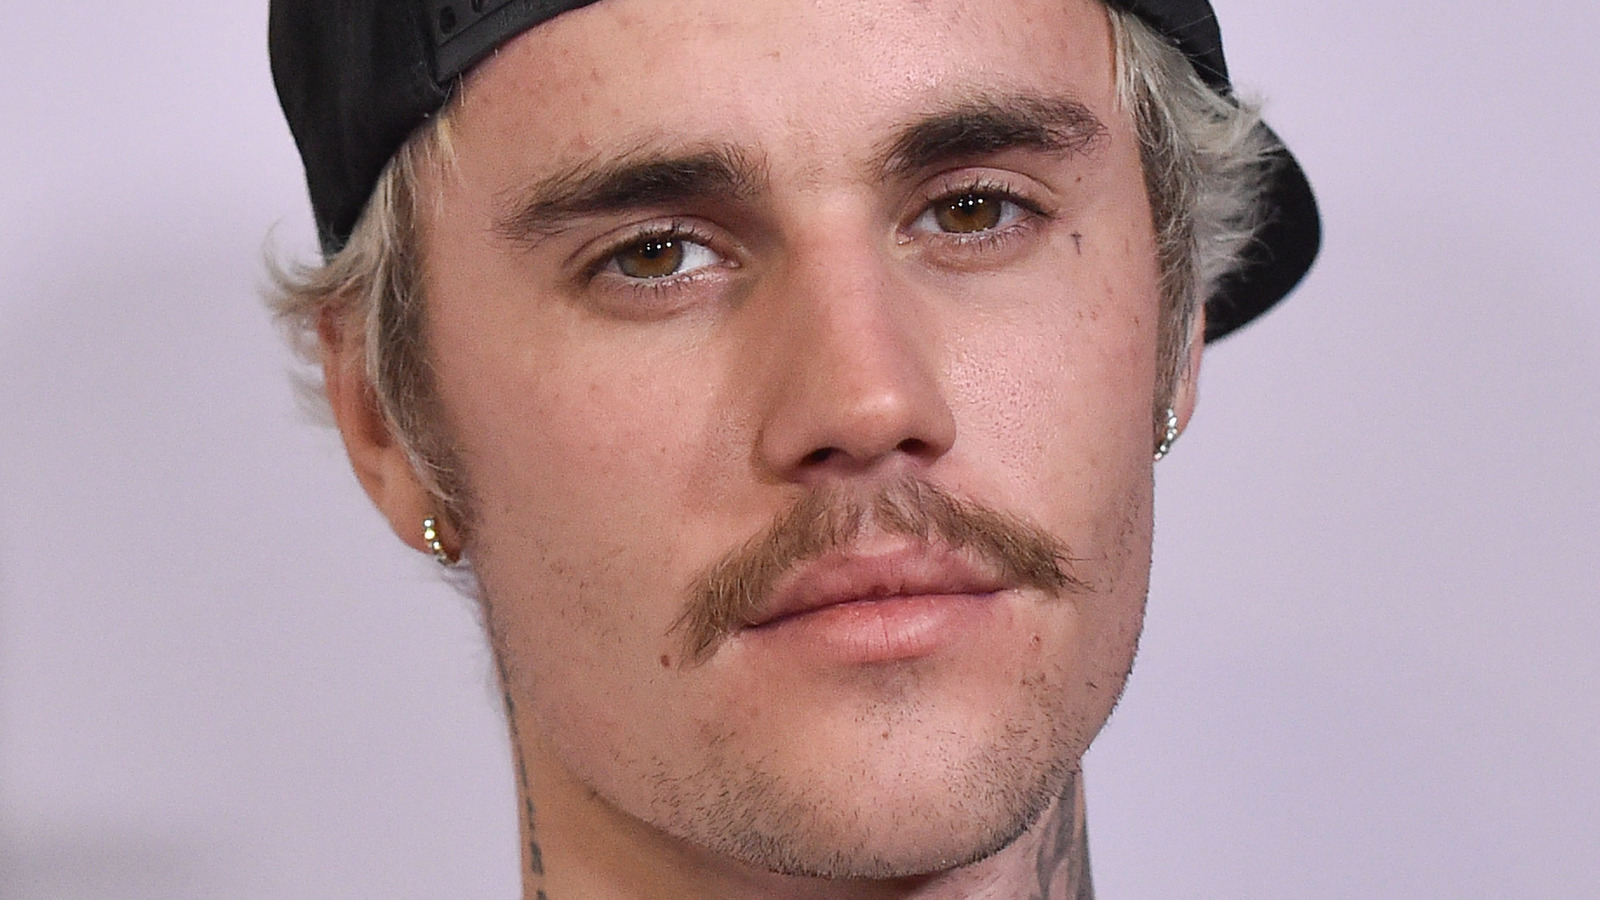 Justin Bieber's Tattoos: A Complete Guide